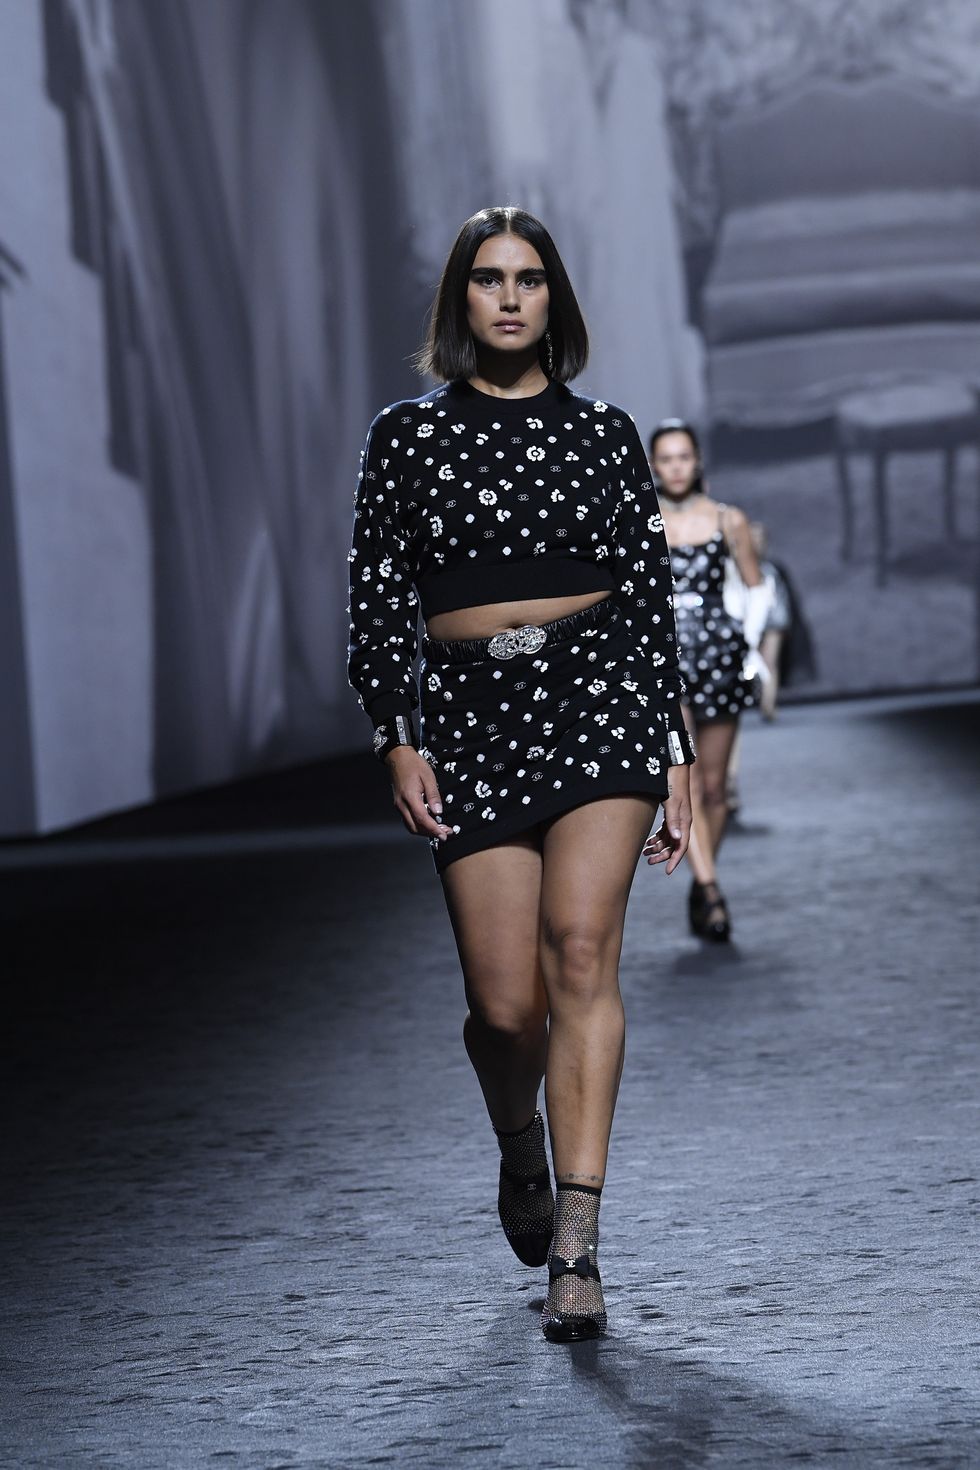 runway at chanel rtw spring 2023 photographed on october 04, 2022 in paris, france photo by giovanni giannoniwwdpenske media via getty images